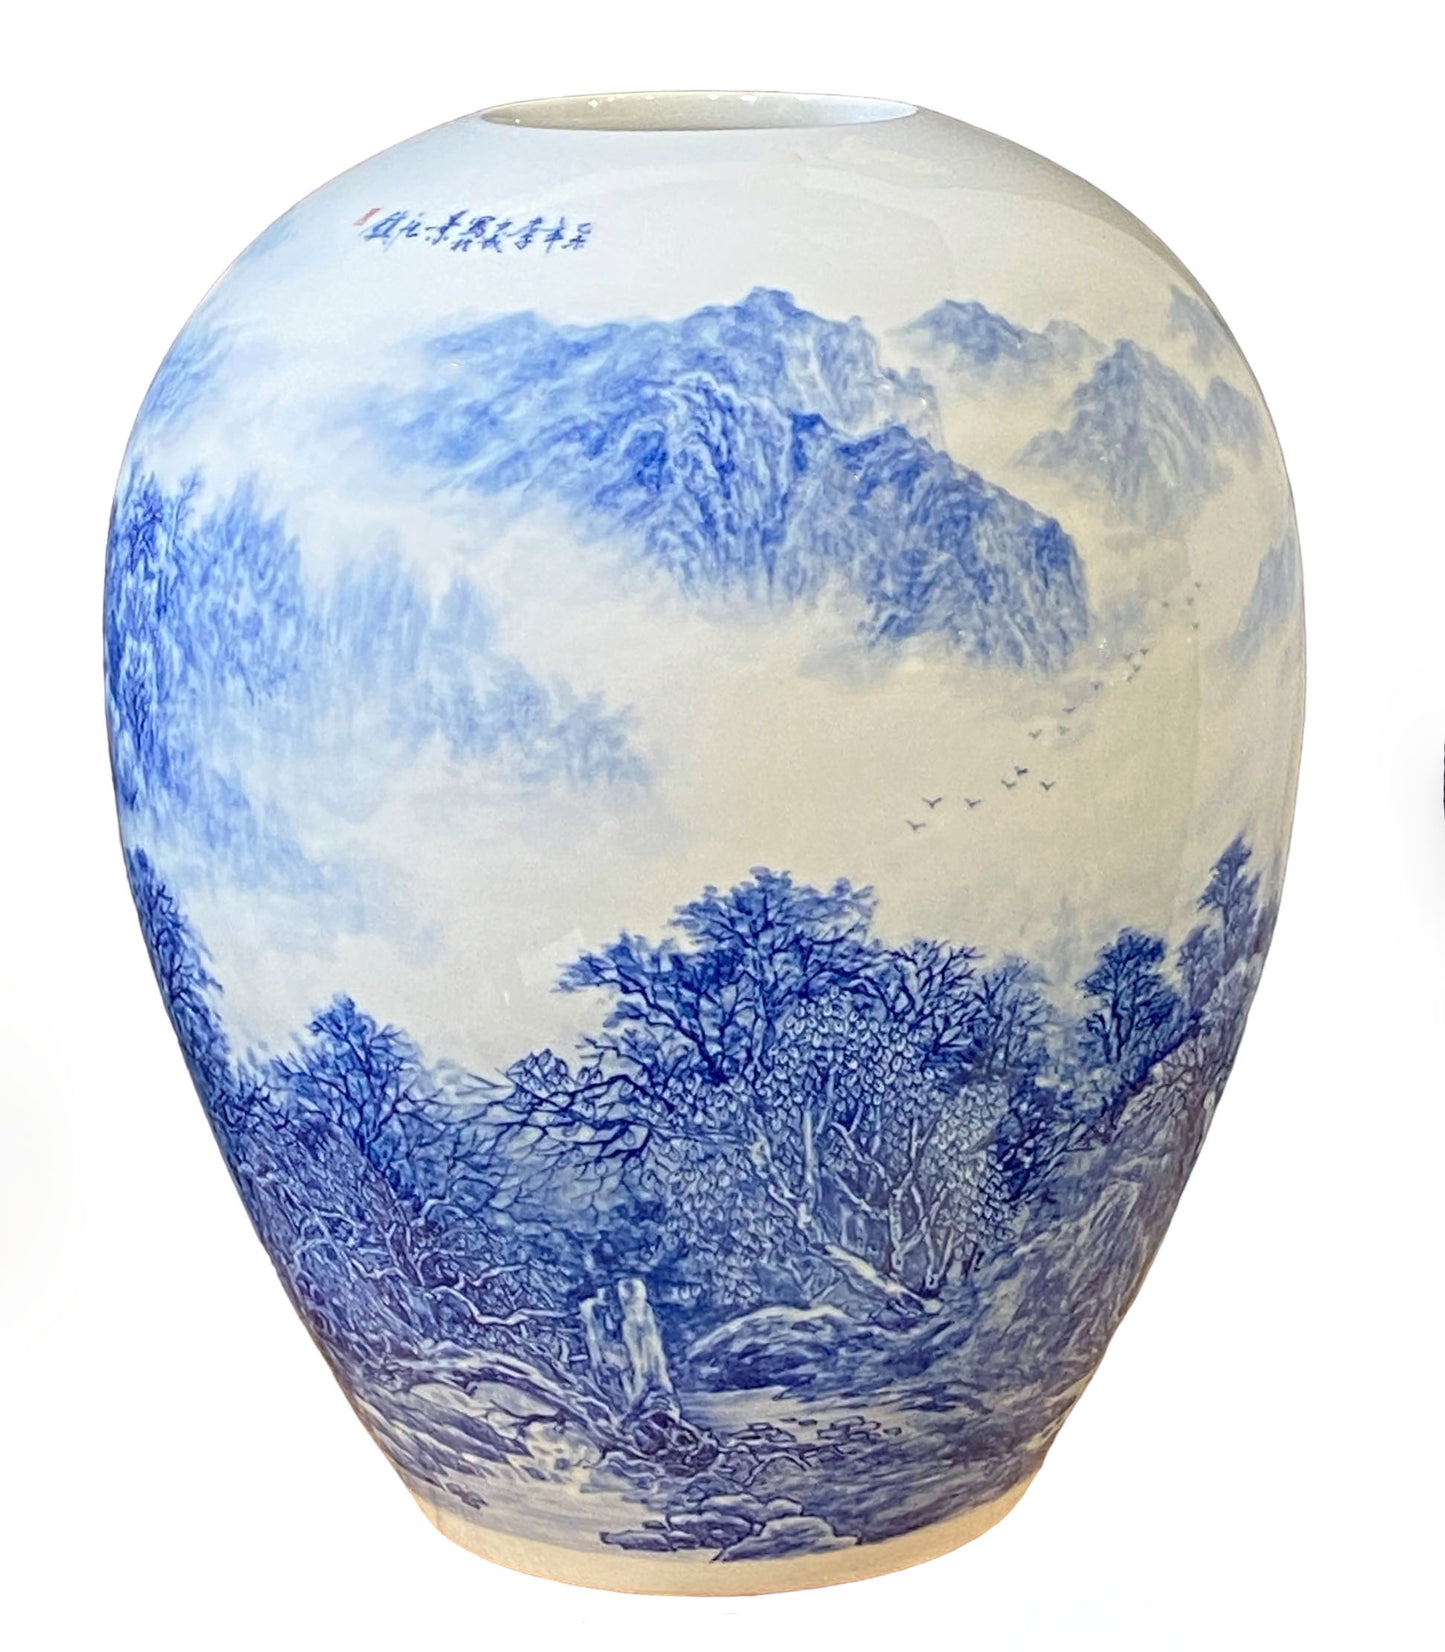 #5786 Chinoiserie Egg Shaped Blue and White Vase 16" H